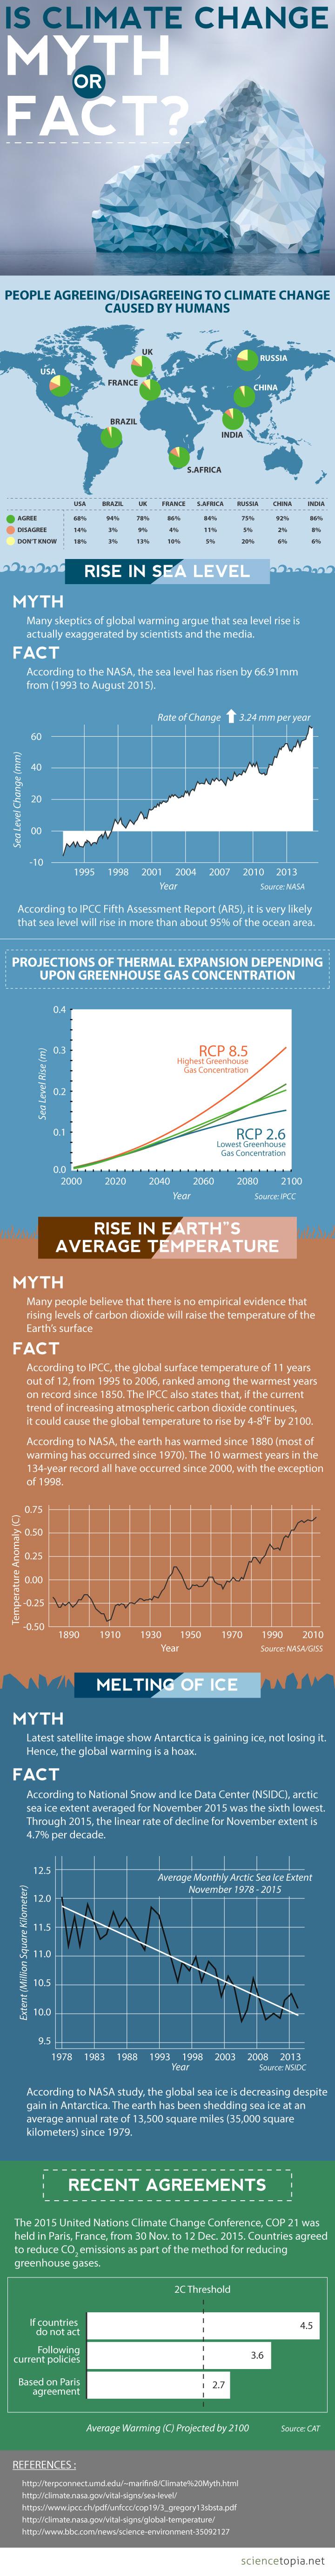 Is climate change myth or fact?